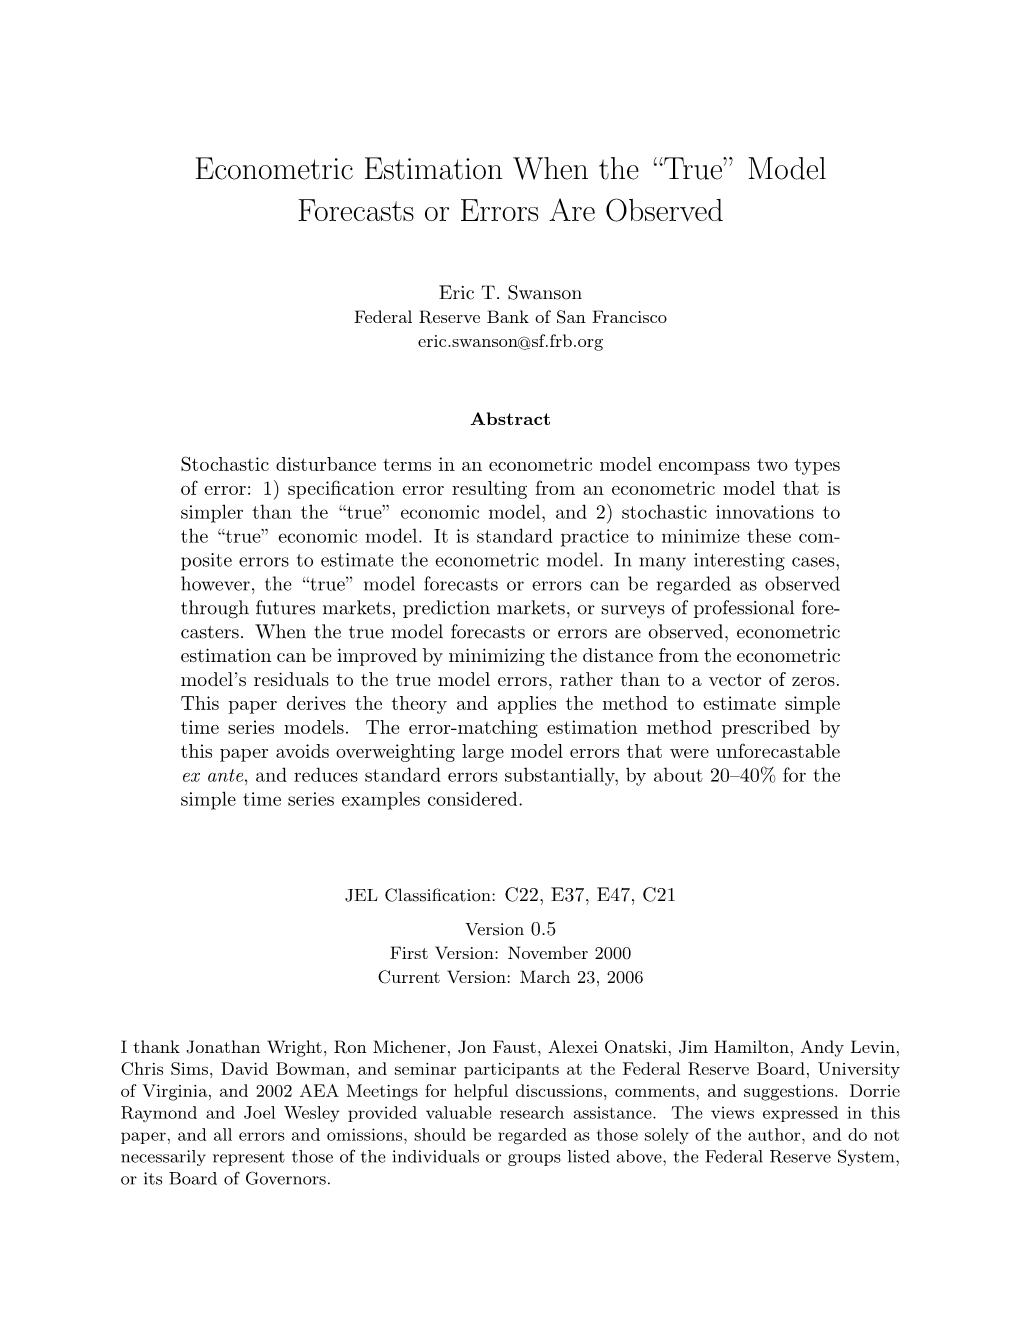 Econometric Estimation When the “True” Model Forecasts Or Errors Are Observed